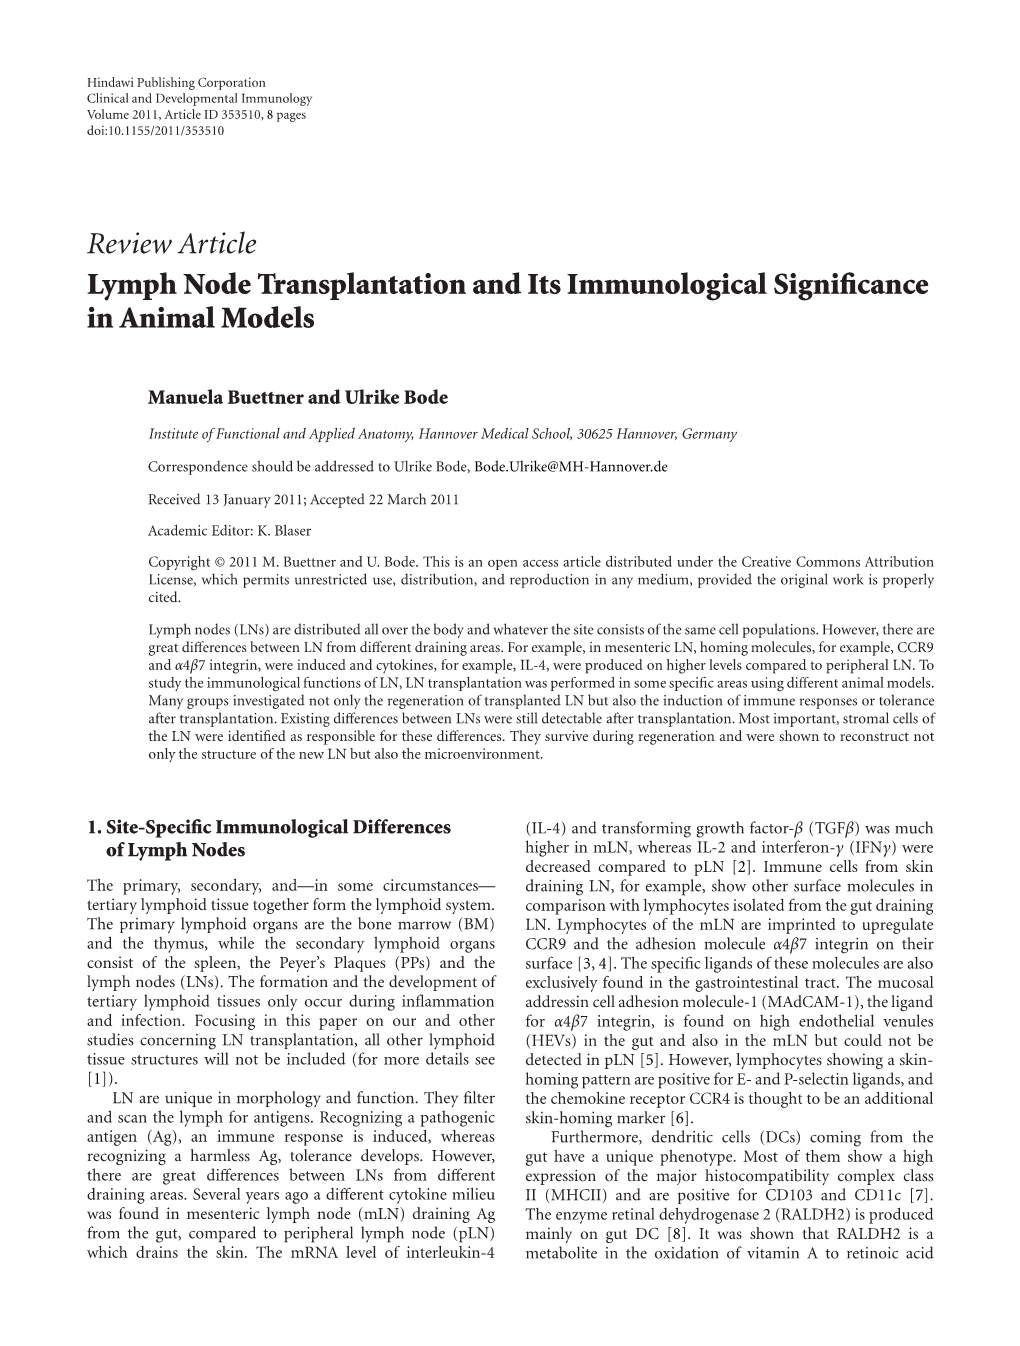 Review Article Lymph Node Transplantation and Its Immunological Signiﬁcance in Animal Models